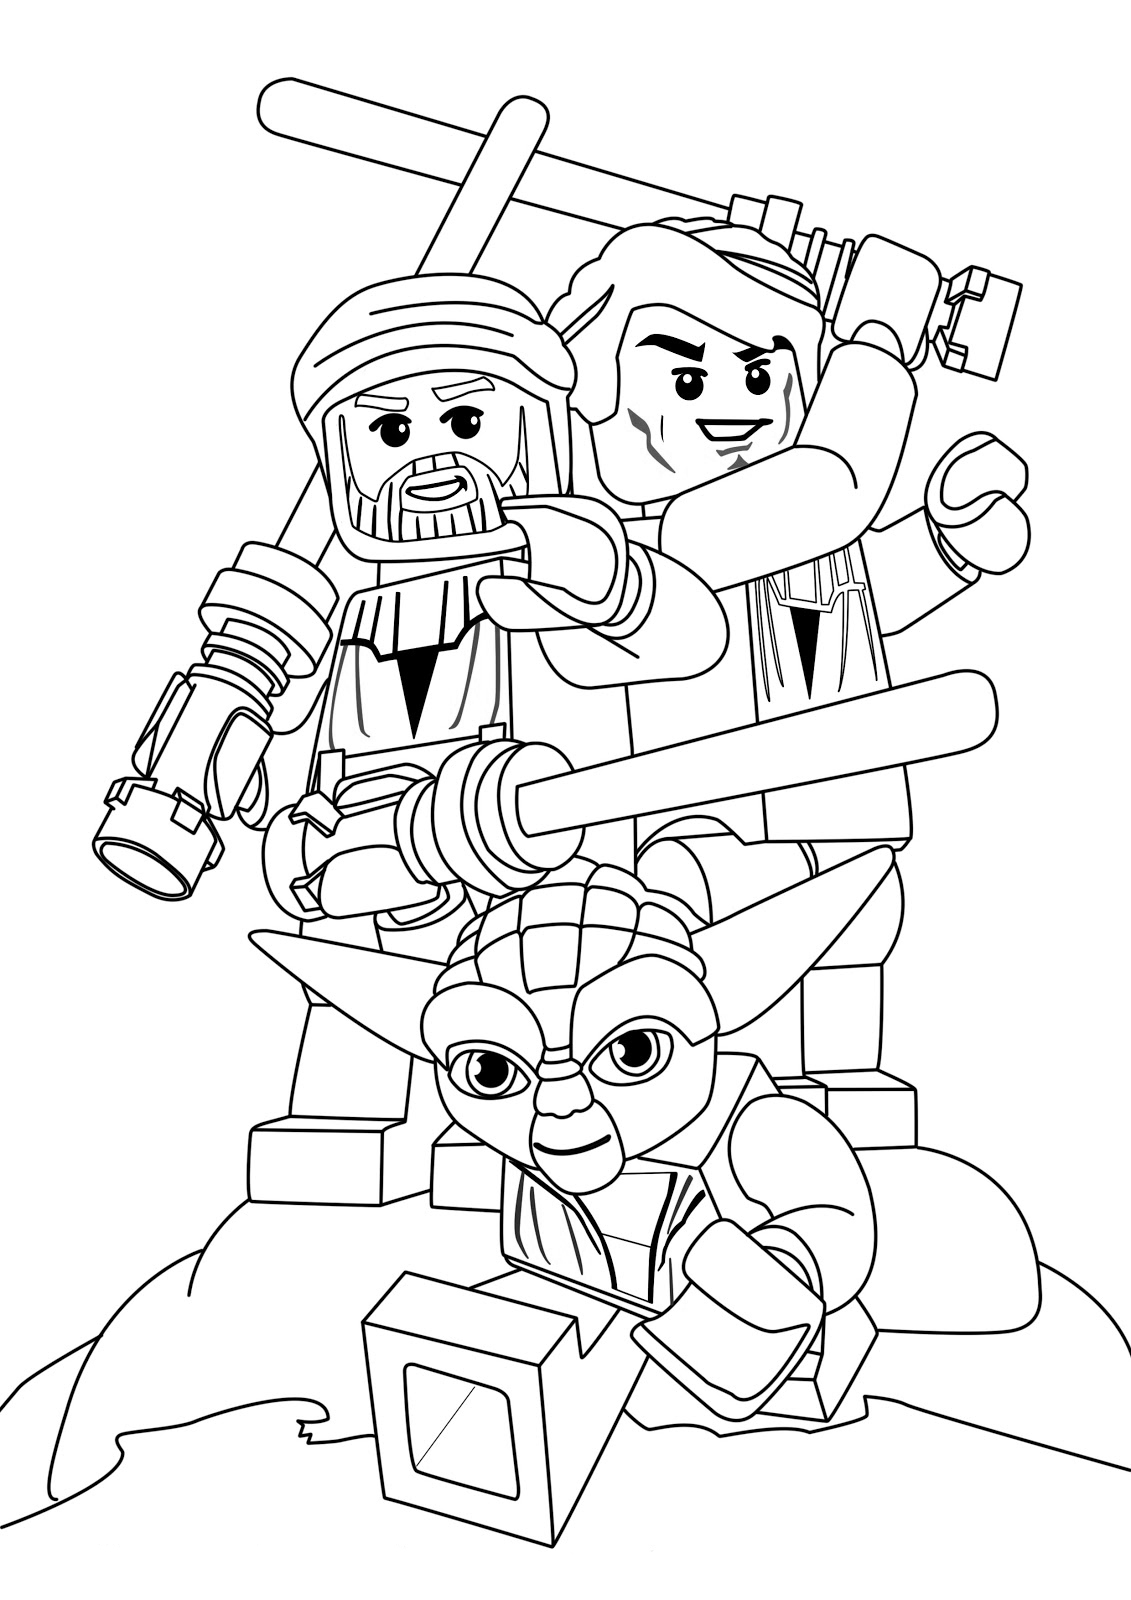 Download Lego Colouring Pages For Kids